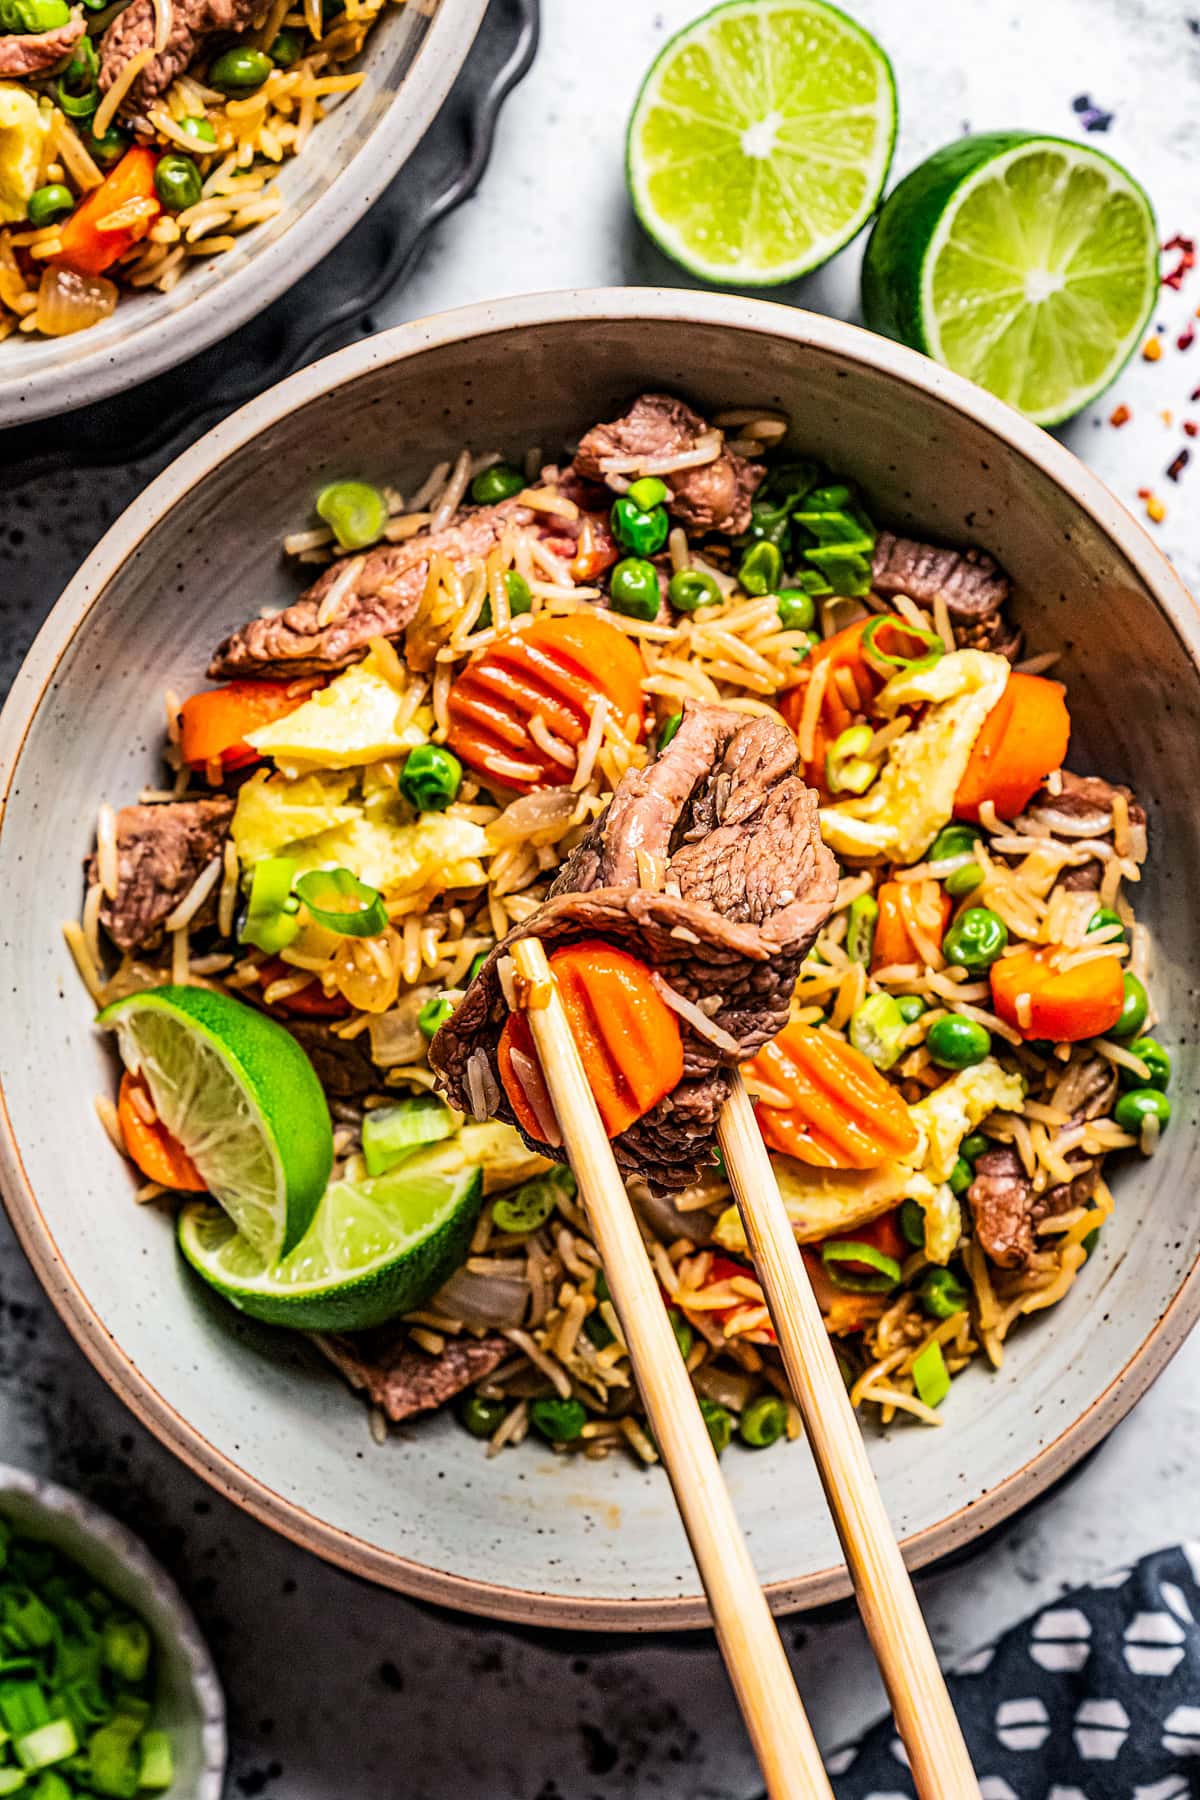 Chopsticks reaching for a strip of steak in a bowl filled with rice, beef, carrots, and eggs.